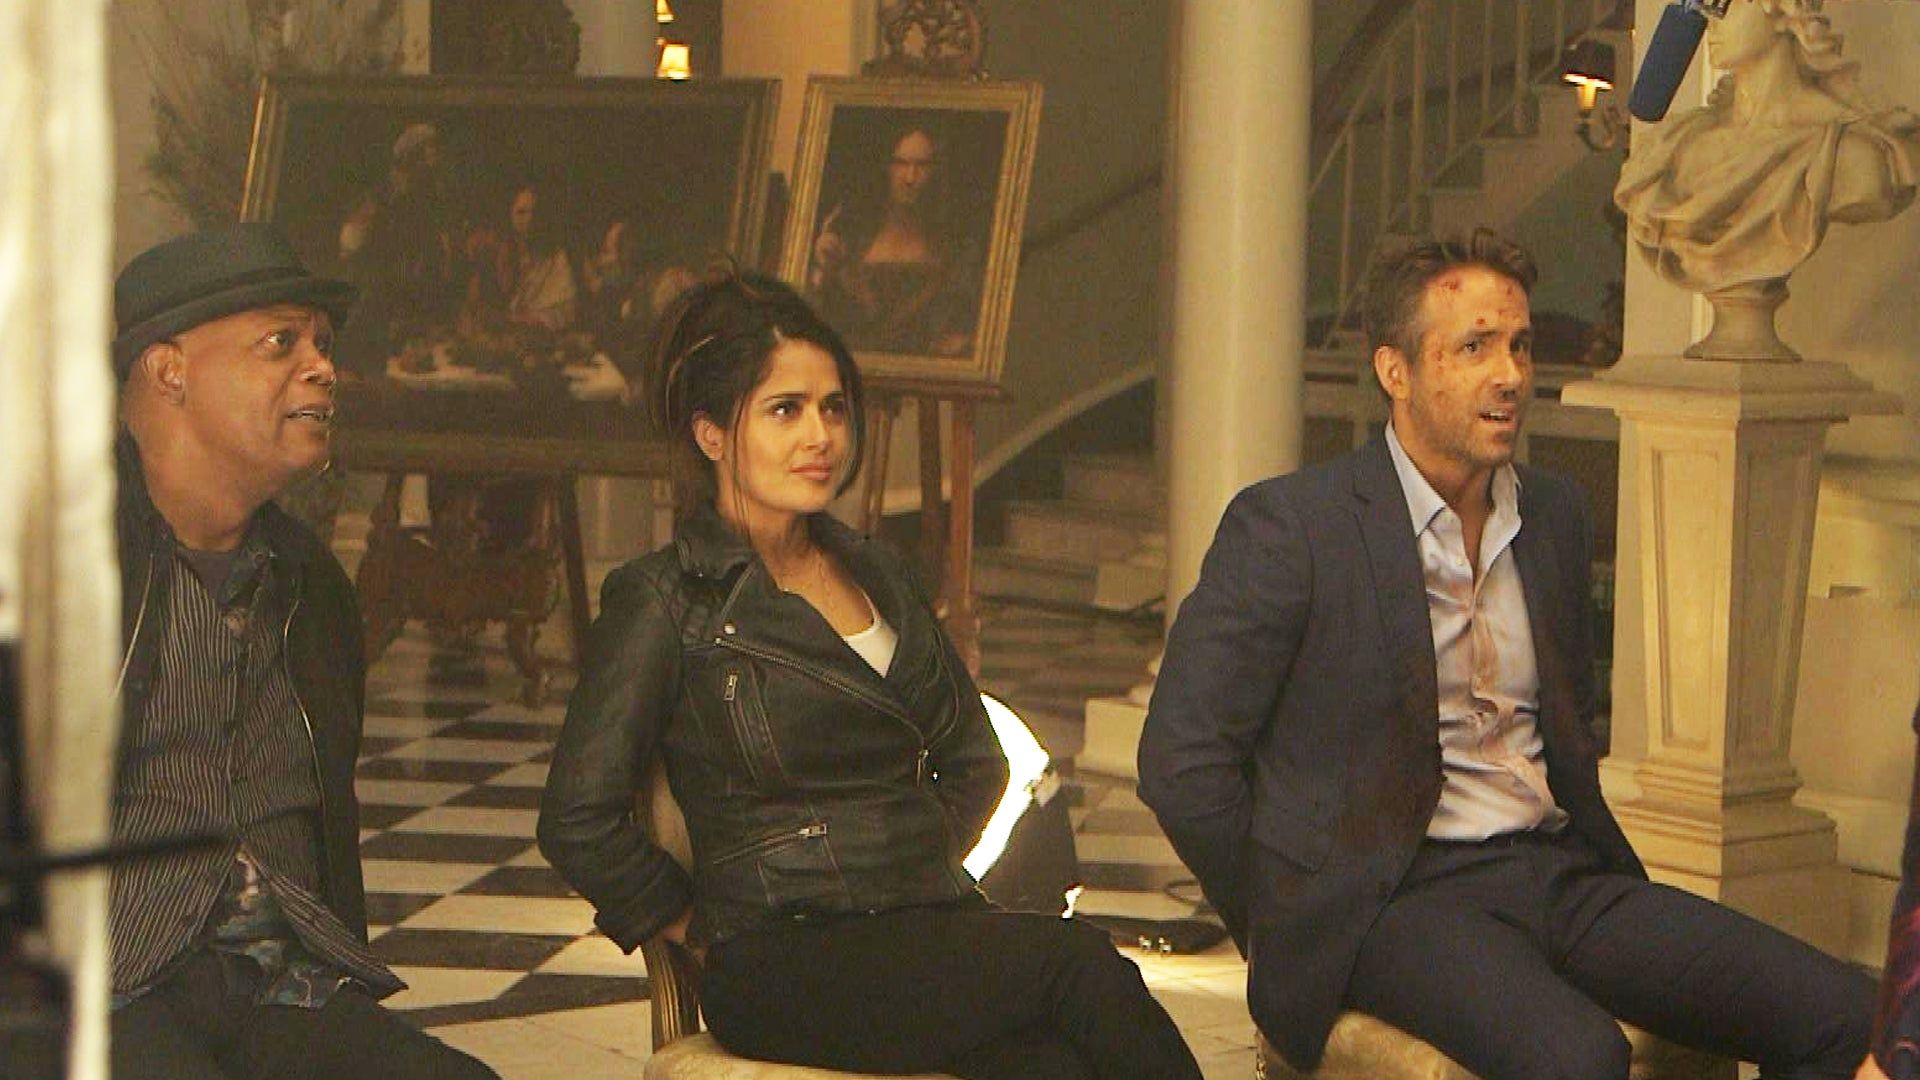 On Set of 'The Hitman's Wife's Bodyguard' With Salma Hayek and Ryan Reynolds (Exclusive)